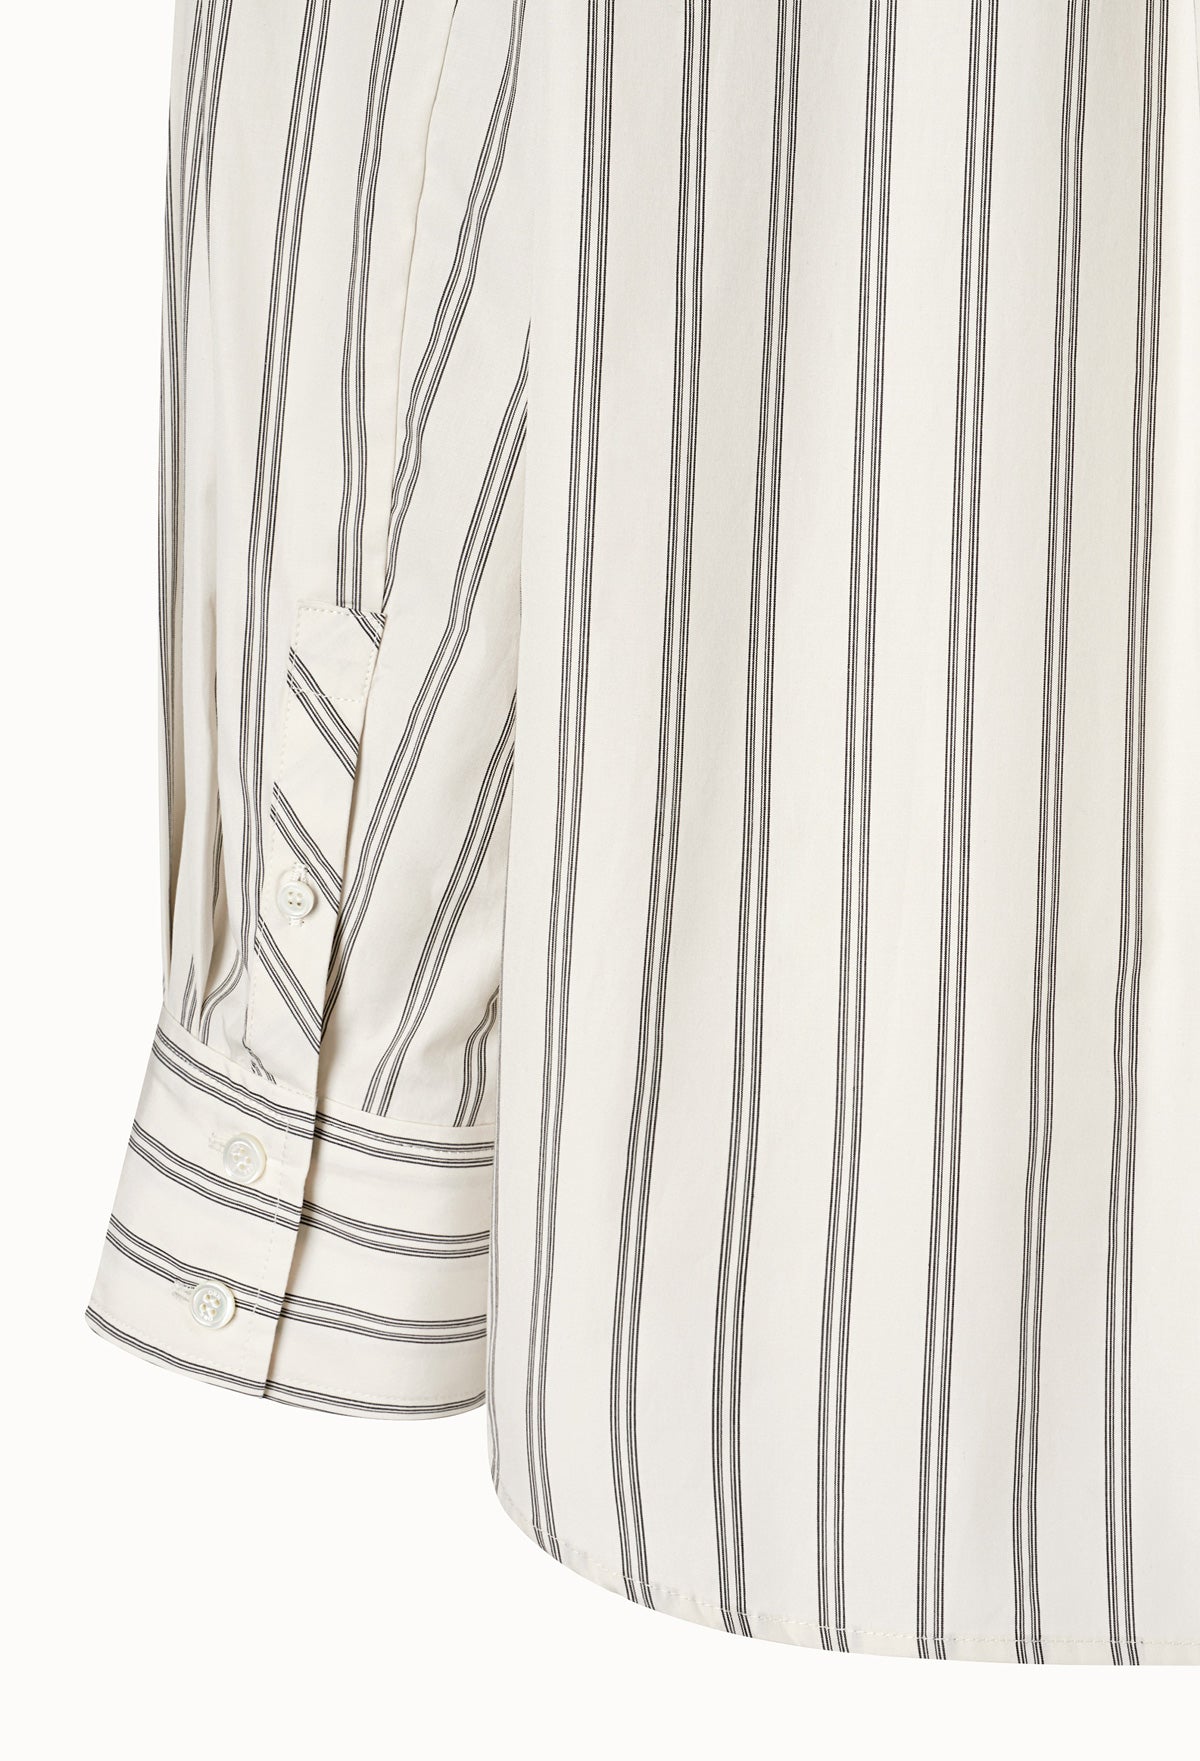 Striped Cotton Shirt In Ivory